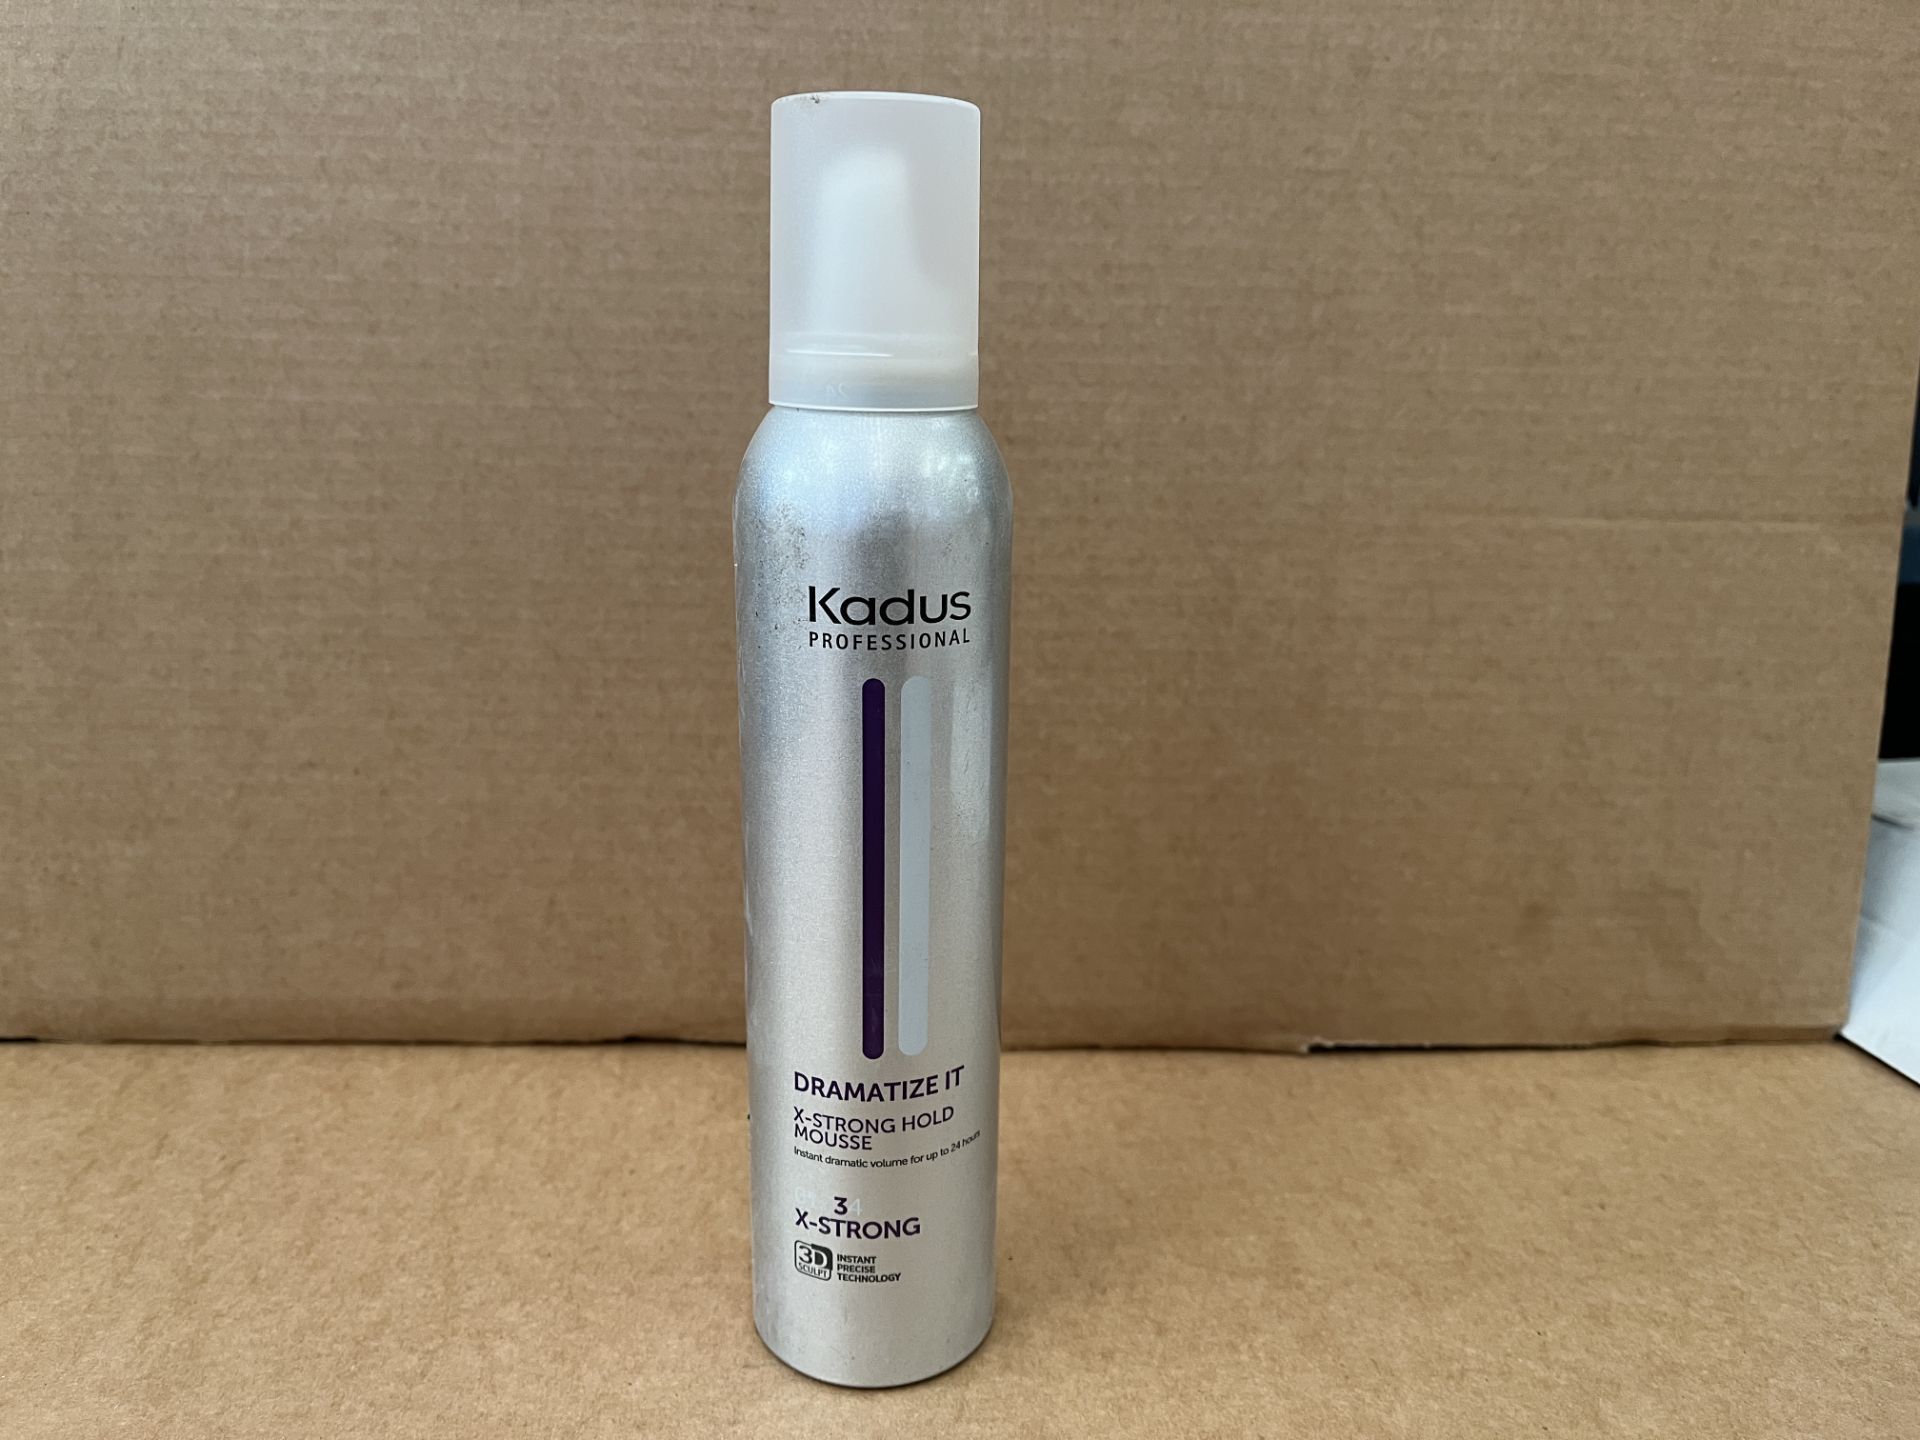 72 X BRAND NEW KADUS PROFESSIONAL DRAMATIZE IT X STRONG HOLD MOUSSE 250ML RRP £9 EACH S1-33